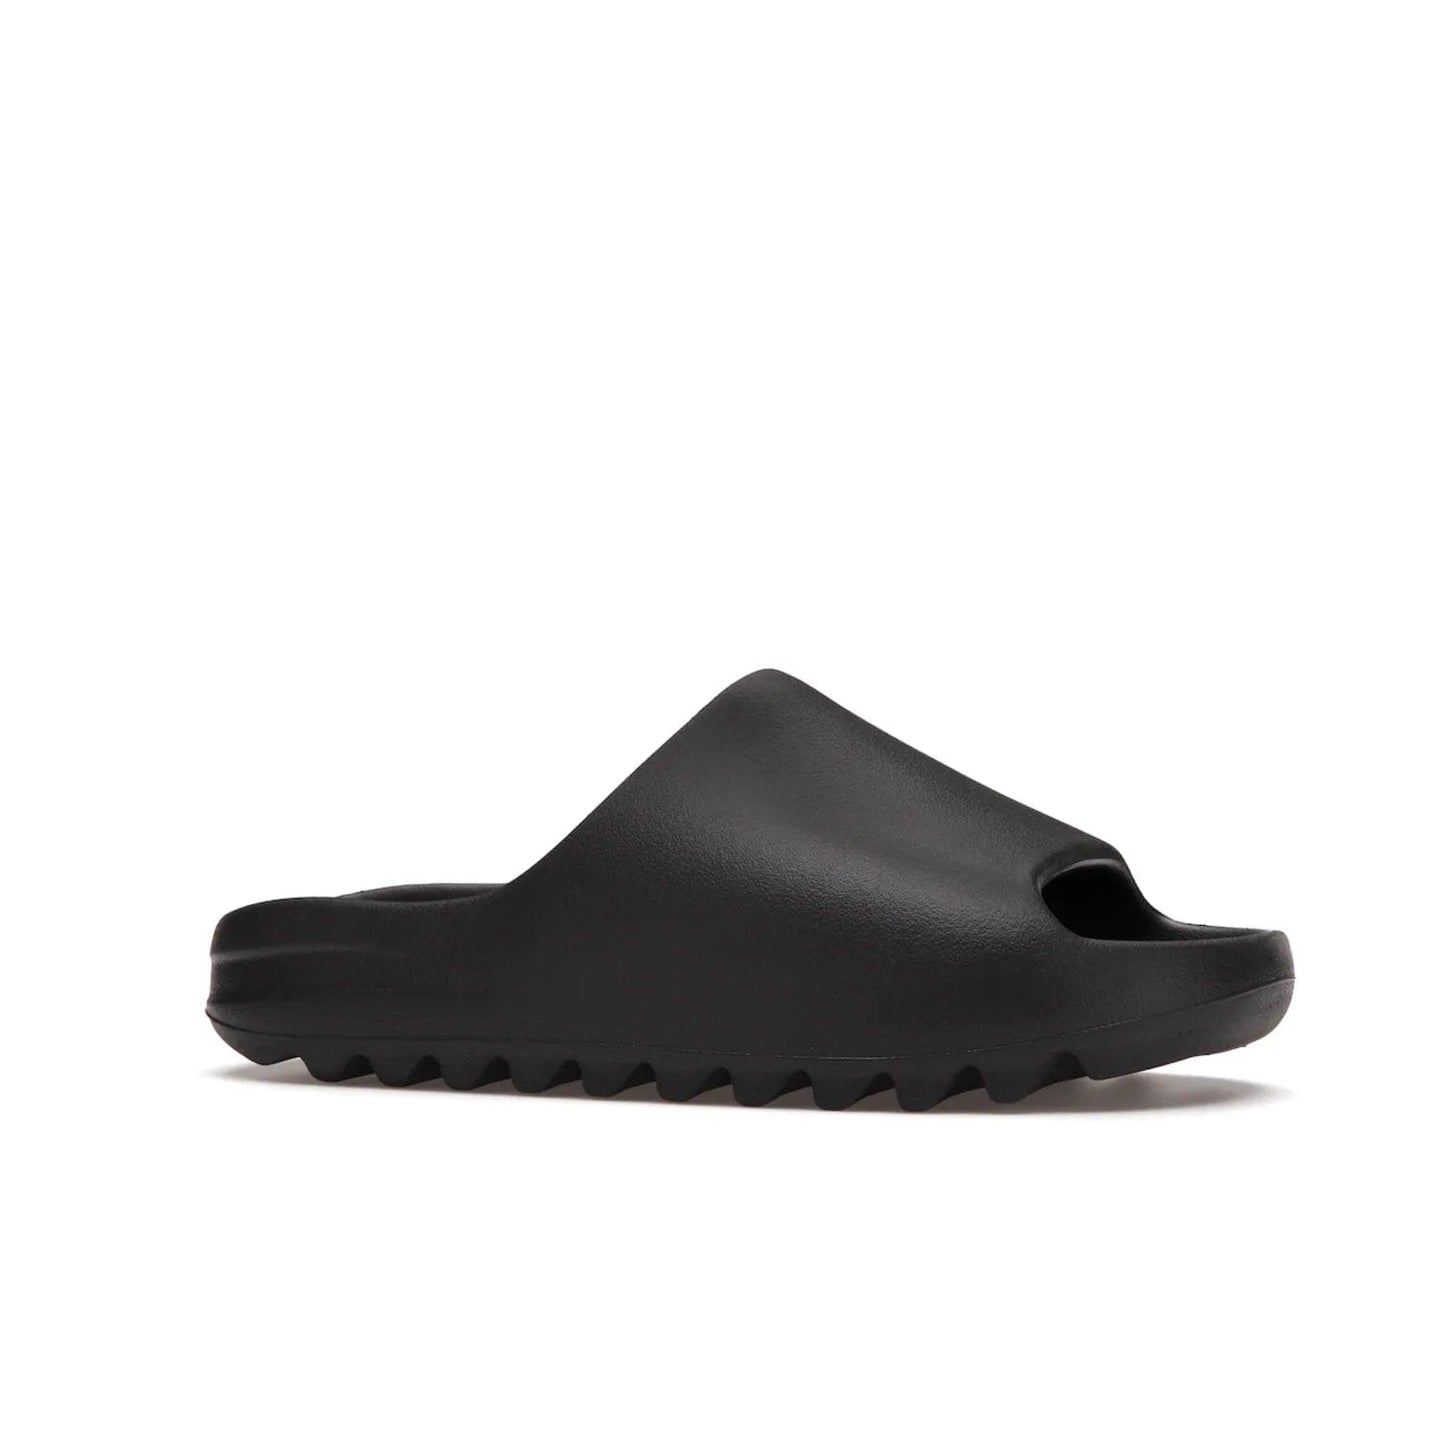 adidas Yeezy Slide Onyx - Image 3 - Only at www.BallersClubKickz.com - Step into comfort and style with the adidas Yeezy Slide Onyx. Featuring foam construction, an all-black colorway and a grooved outsole for stability and responsiveness, this versatile slide is a must-have for your collection.